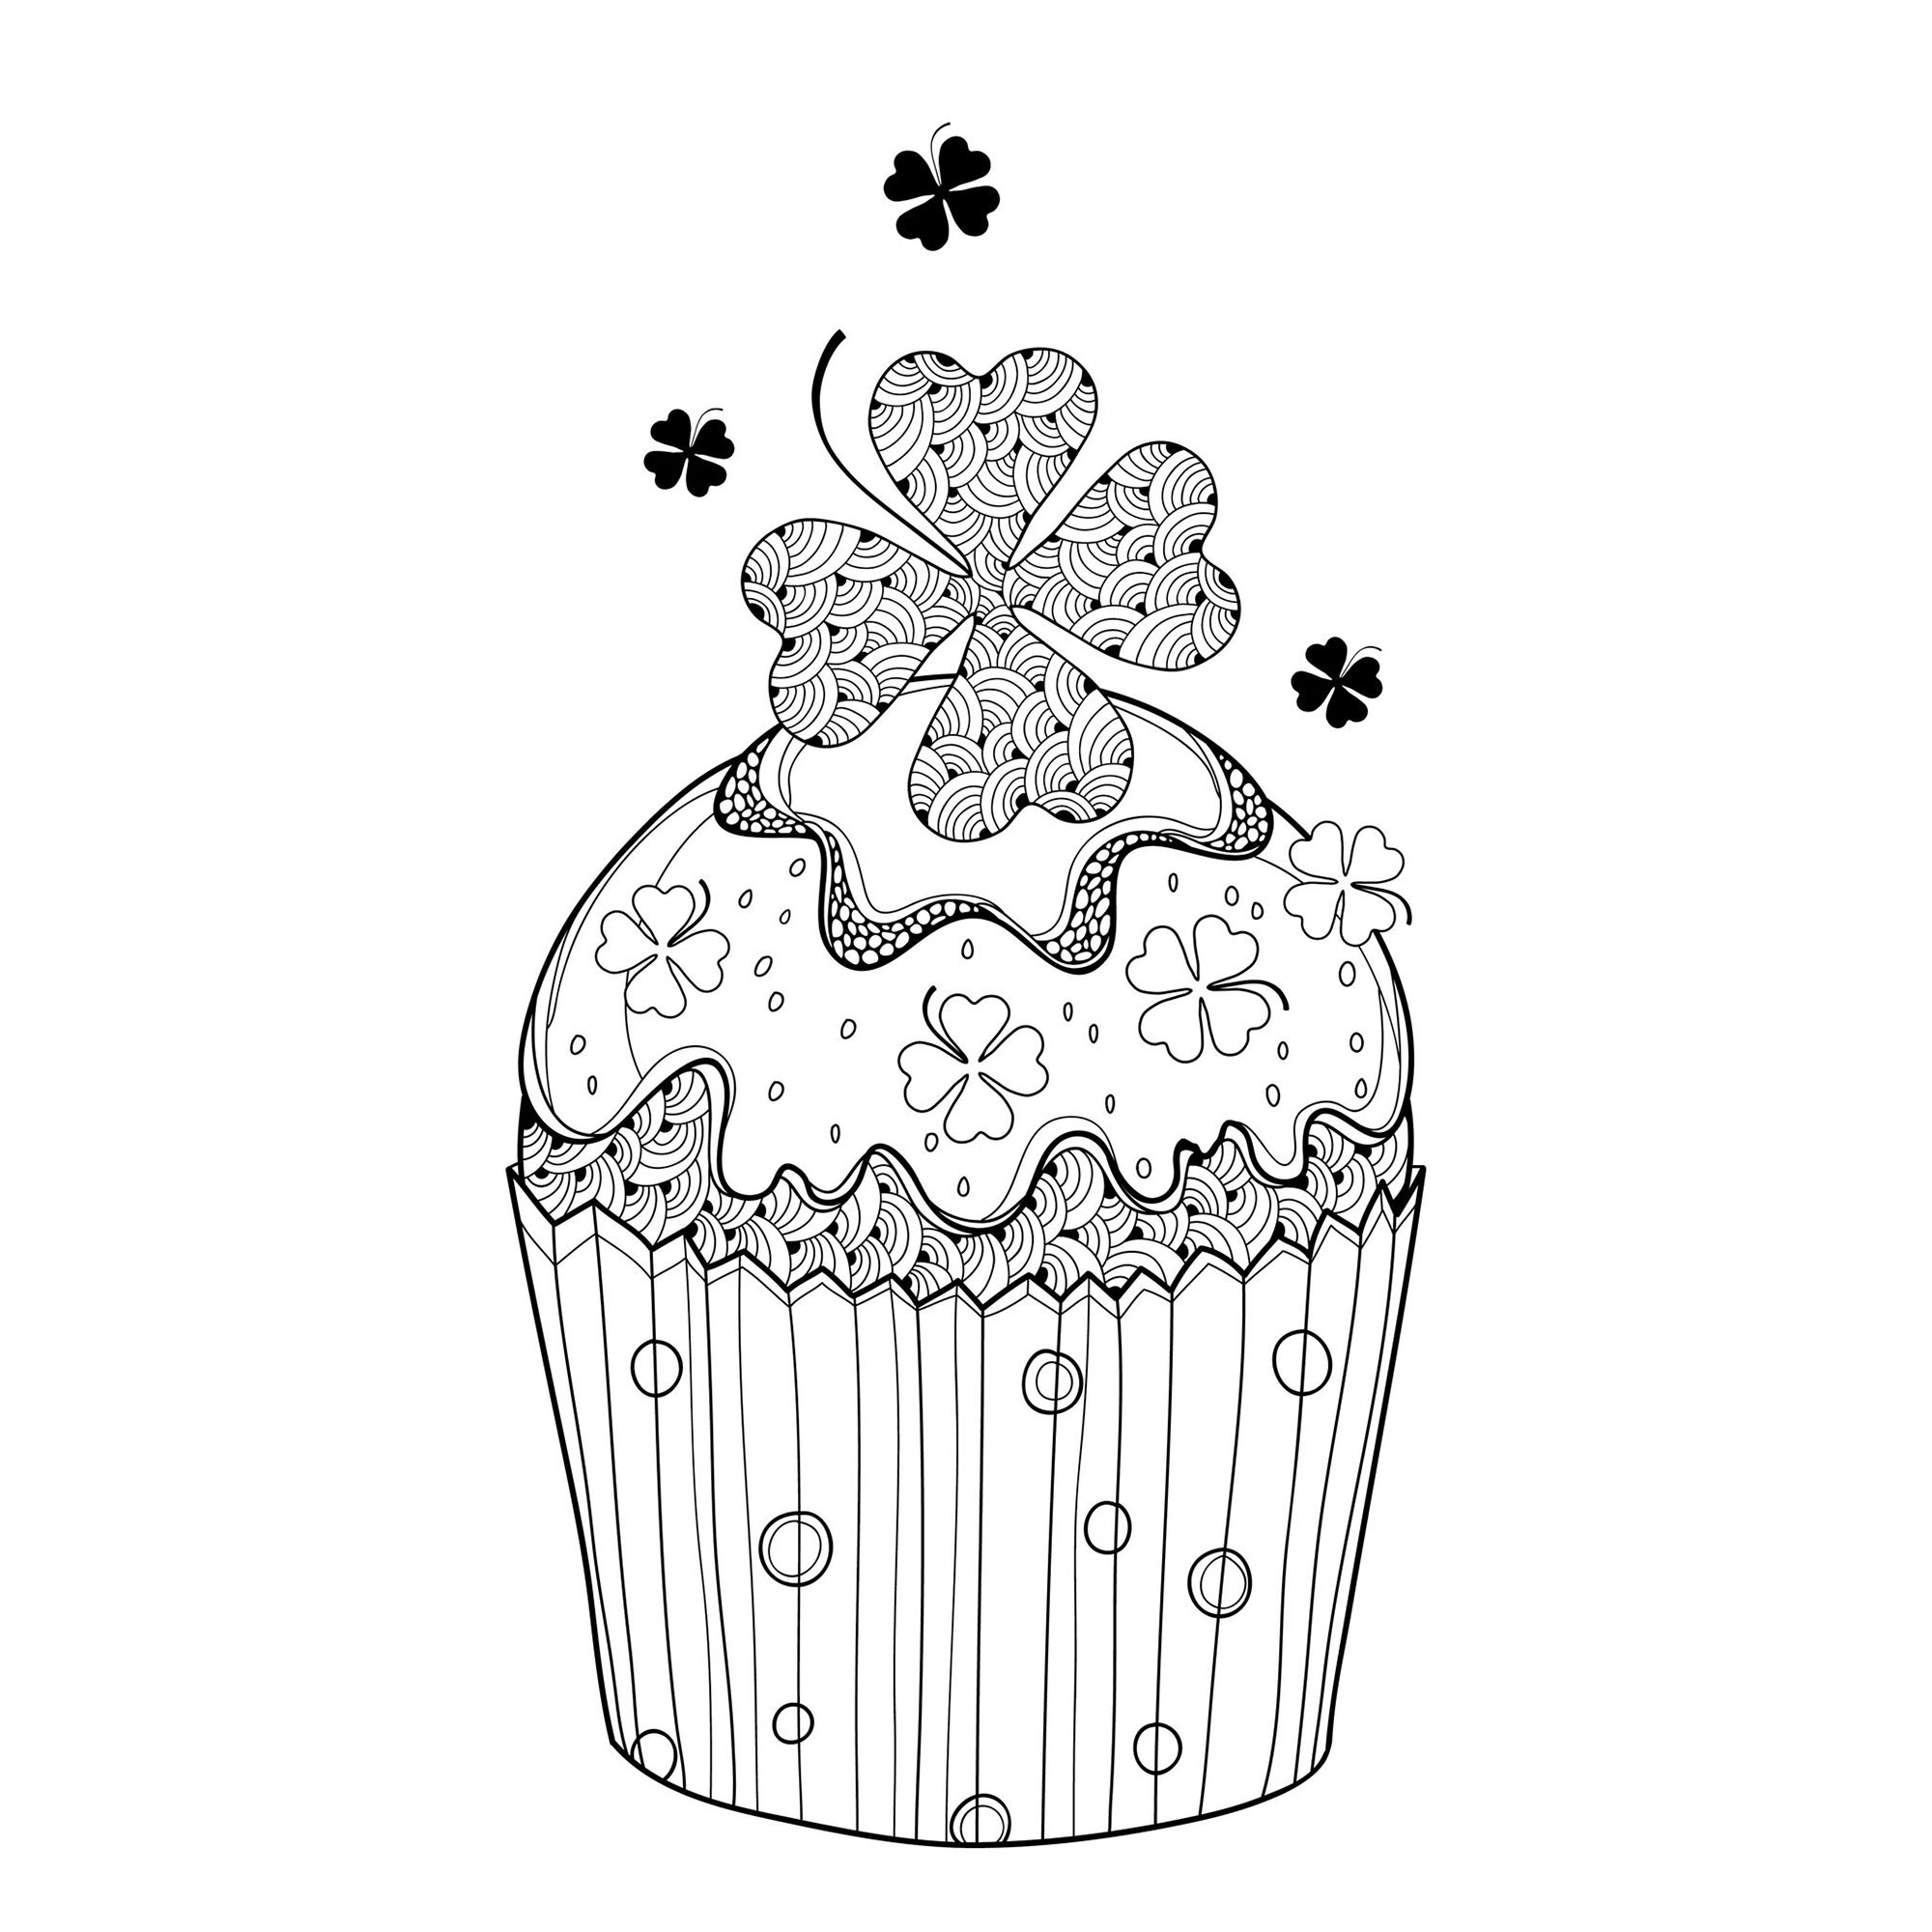 Legend says that coloring this cupcake will give you luck.., Source : 123rf   Artist : Bokosana